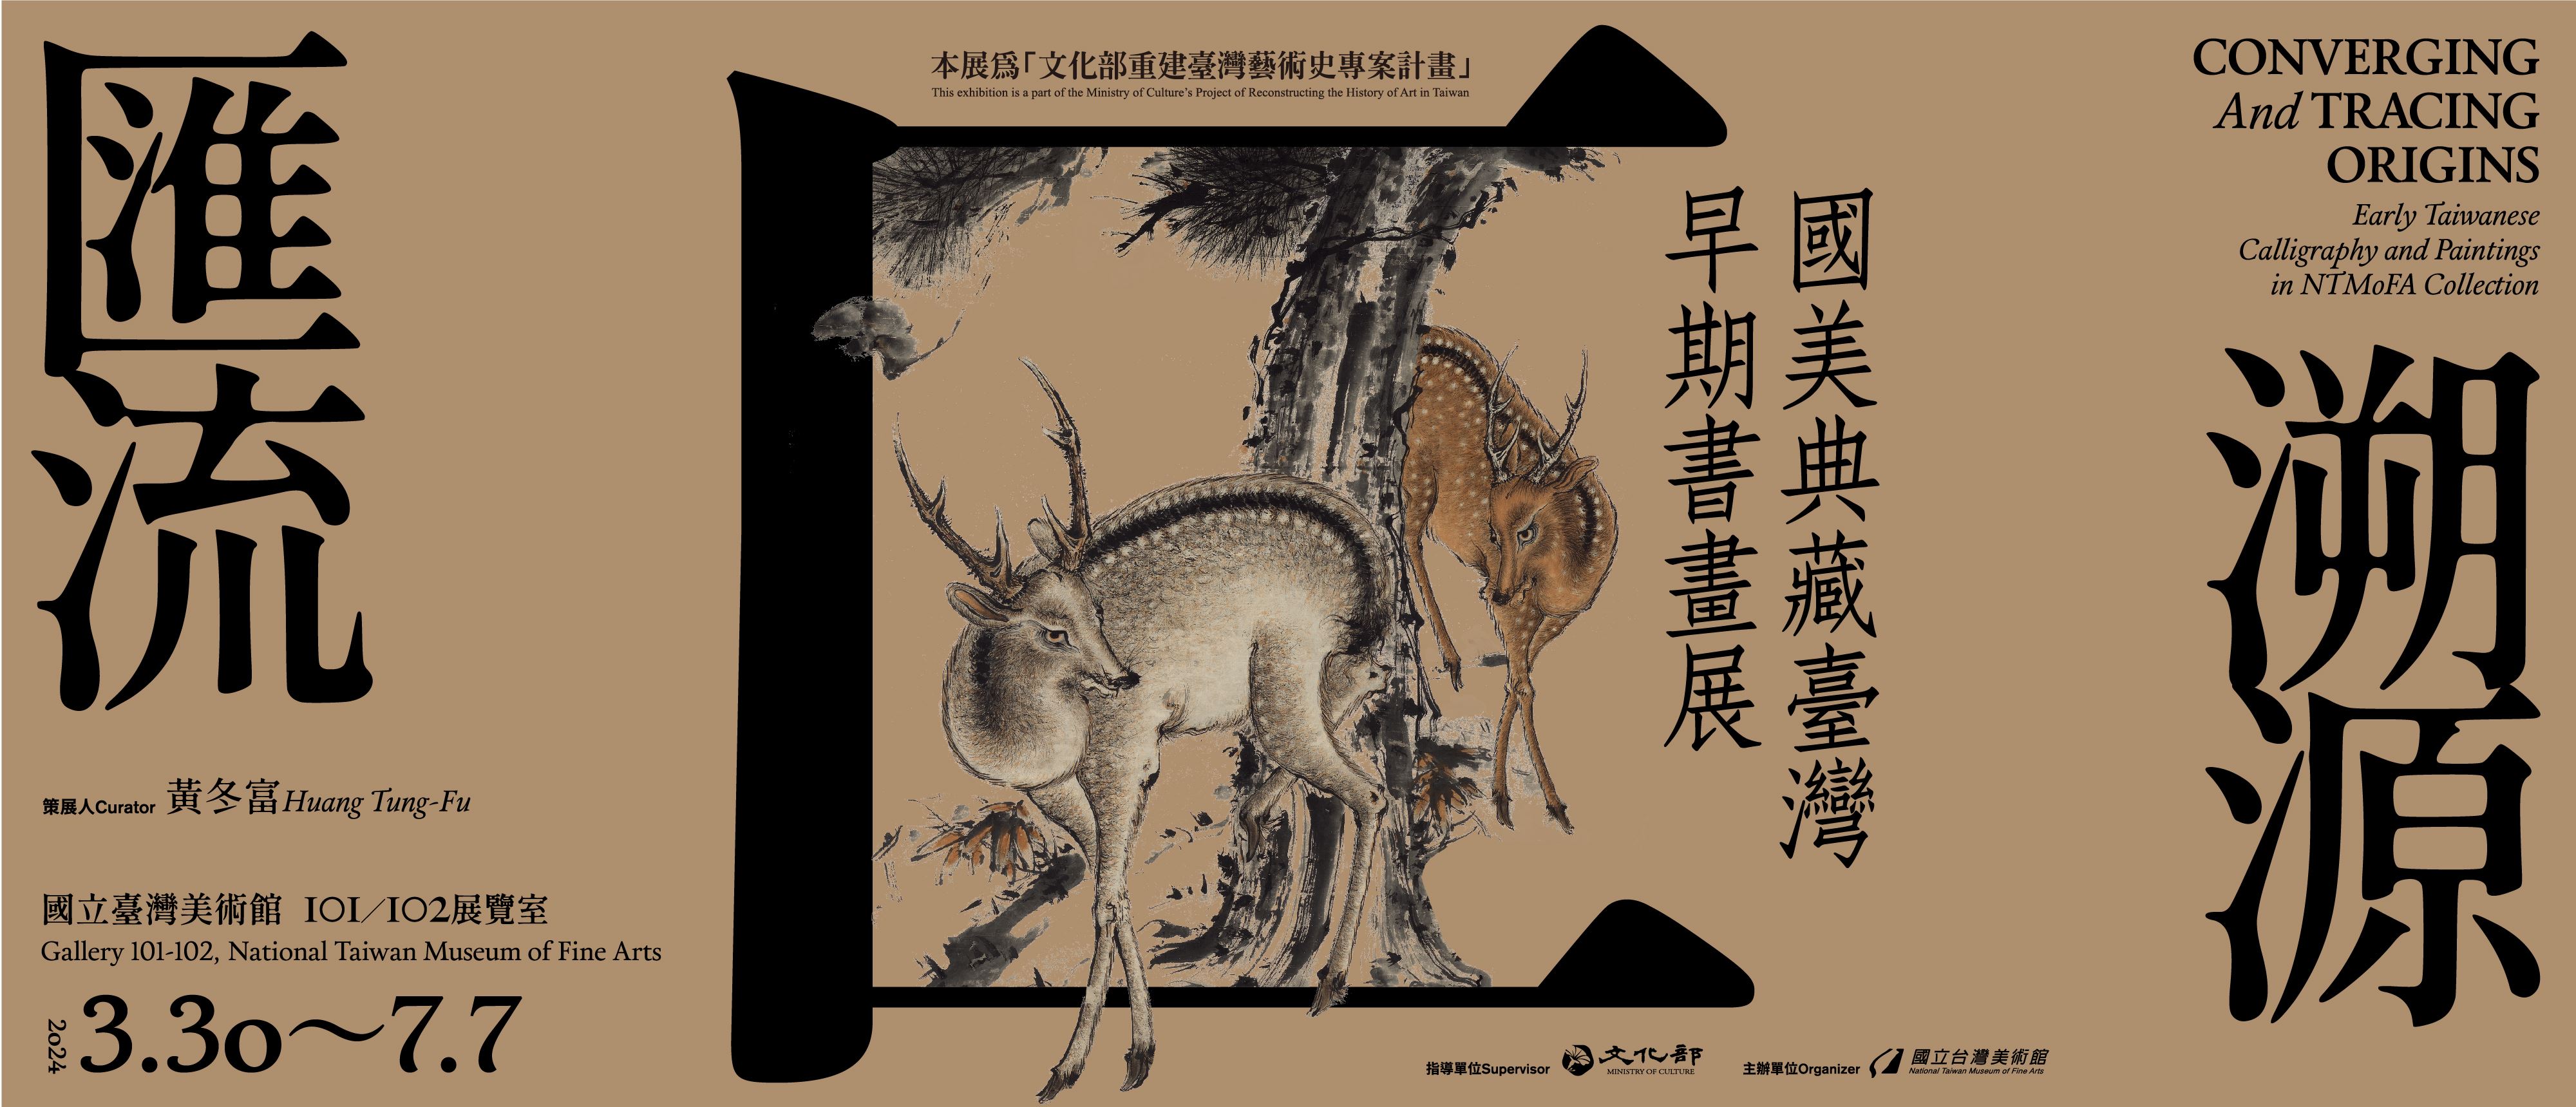 Converging and Tracing Origins: Early Taiwanese Calligraphy and Paintings in NTMoFA Collection